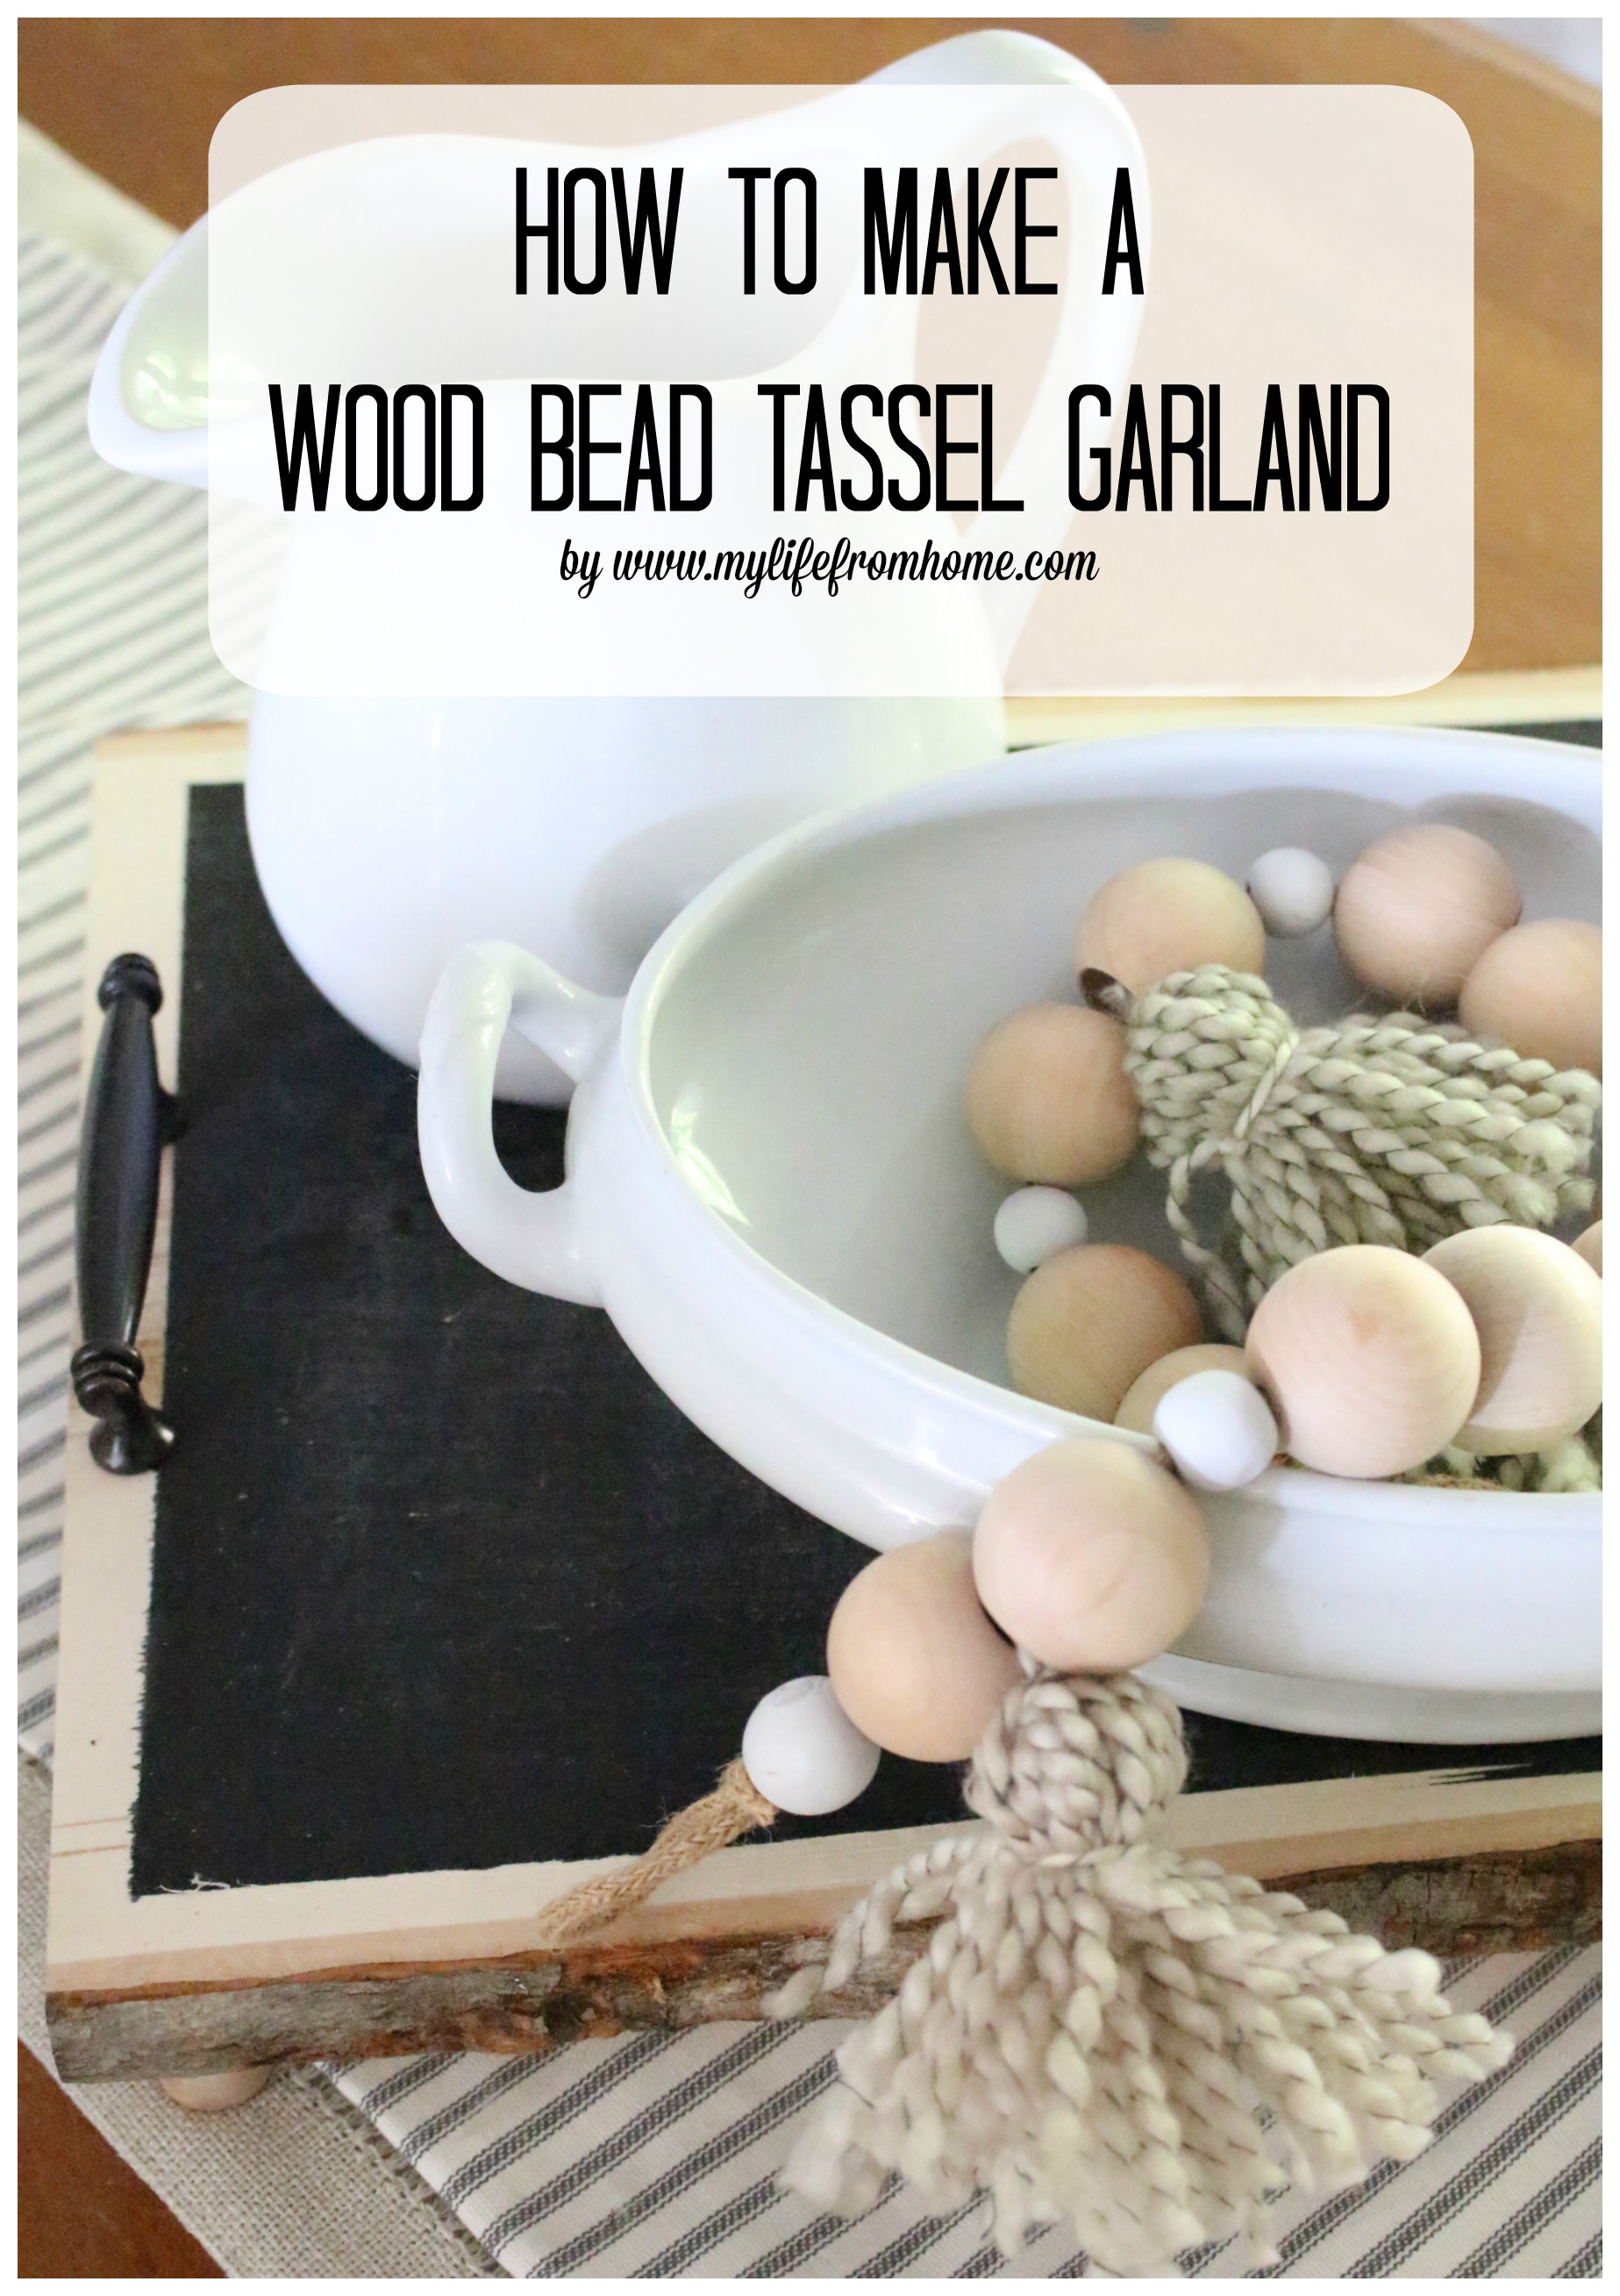 how-to-make-a-wood-bead-tassel-garland-crafts-diy-wood-bead-garland-home-decor-craft-garland-how-to-make-your-own-tassels-diy-tassels